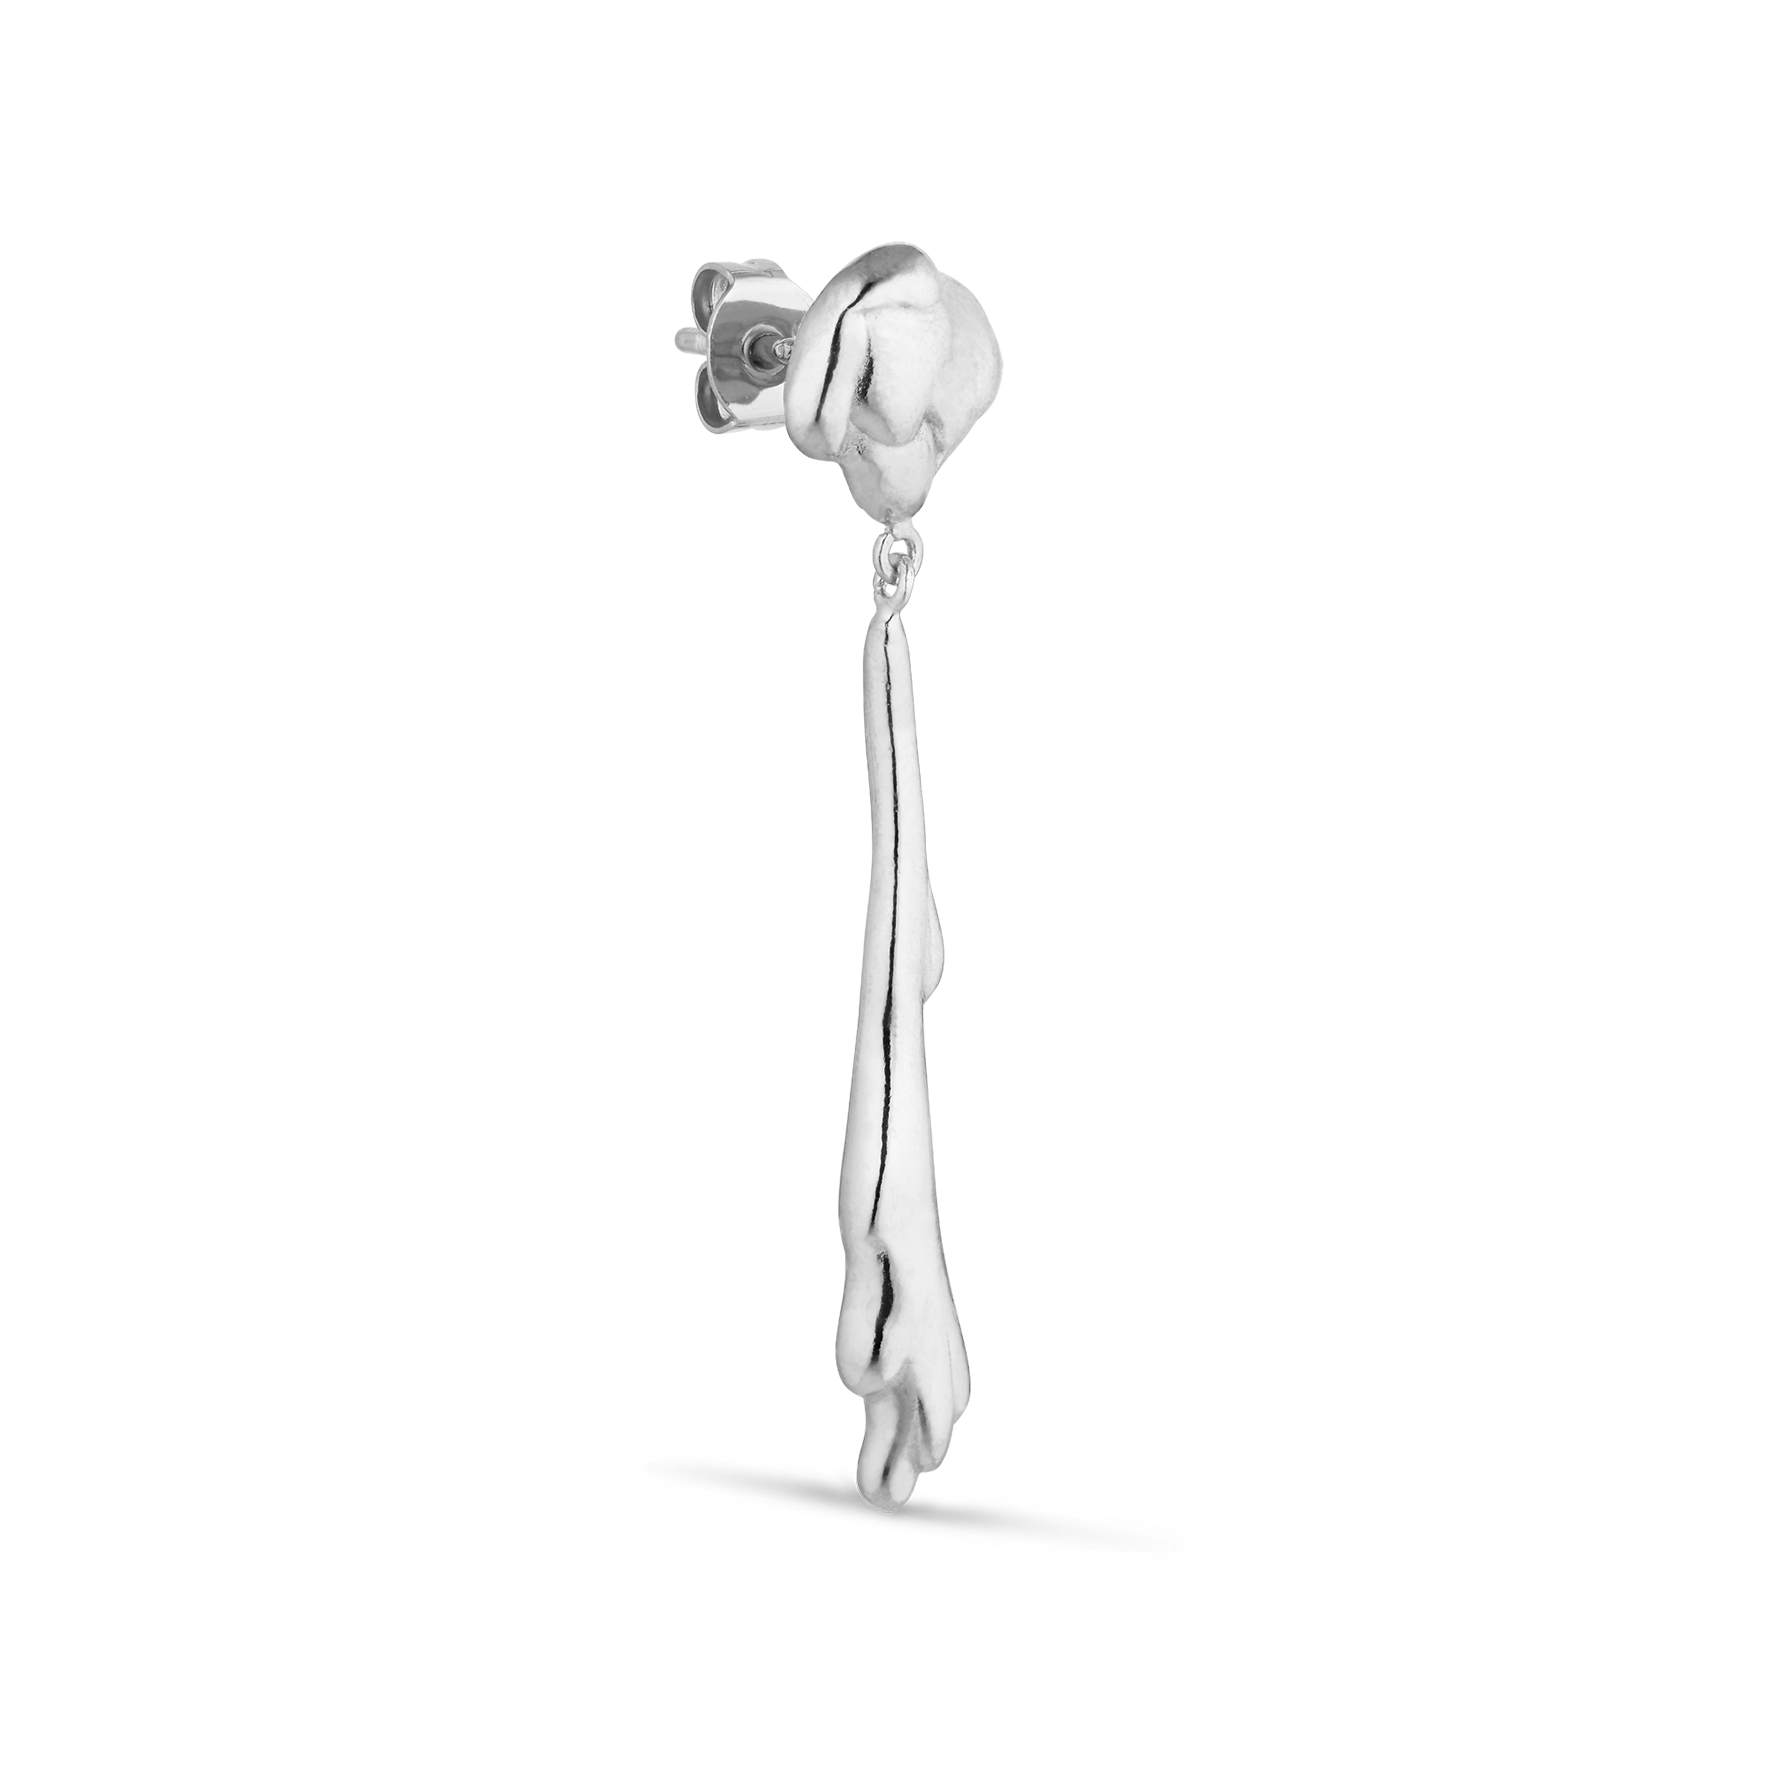 Drippy Earring With Drop Pendant from Jane Kønig in Silver Sterling 925